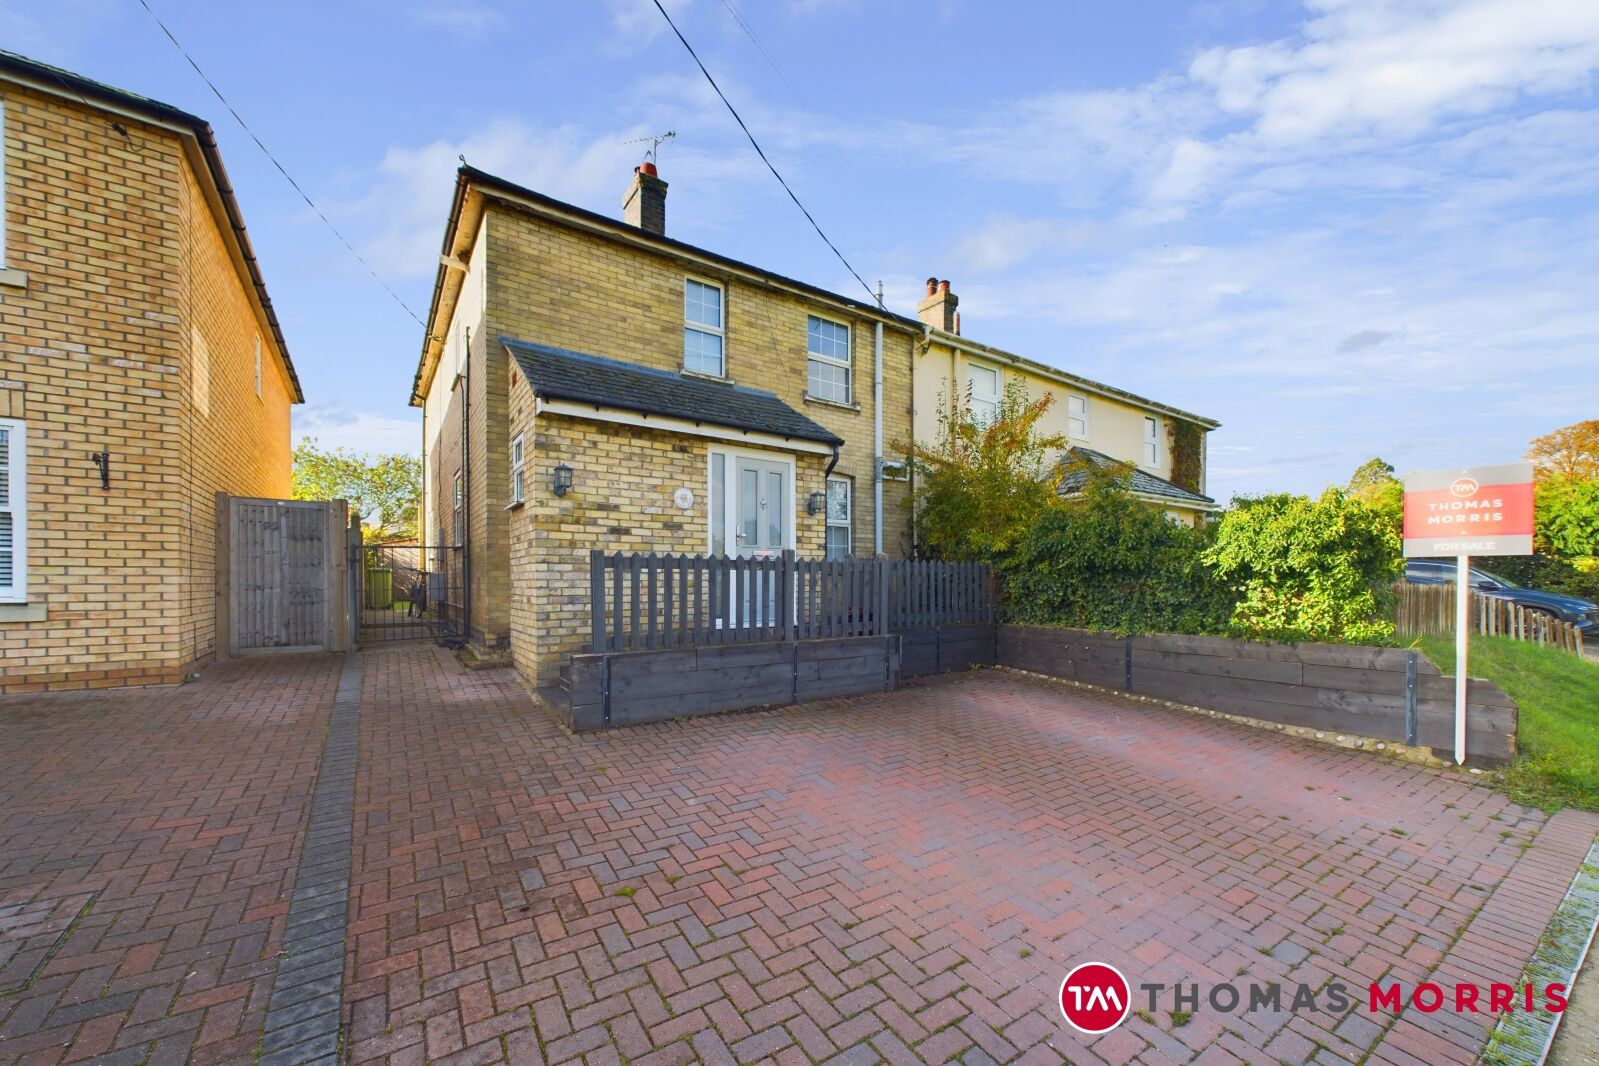 3 bedroom semi detached house for sale Graveley Road, Offord D'Arcy, PE19, main image